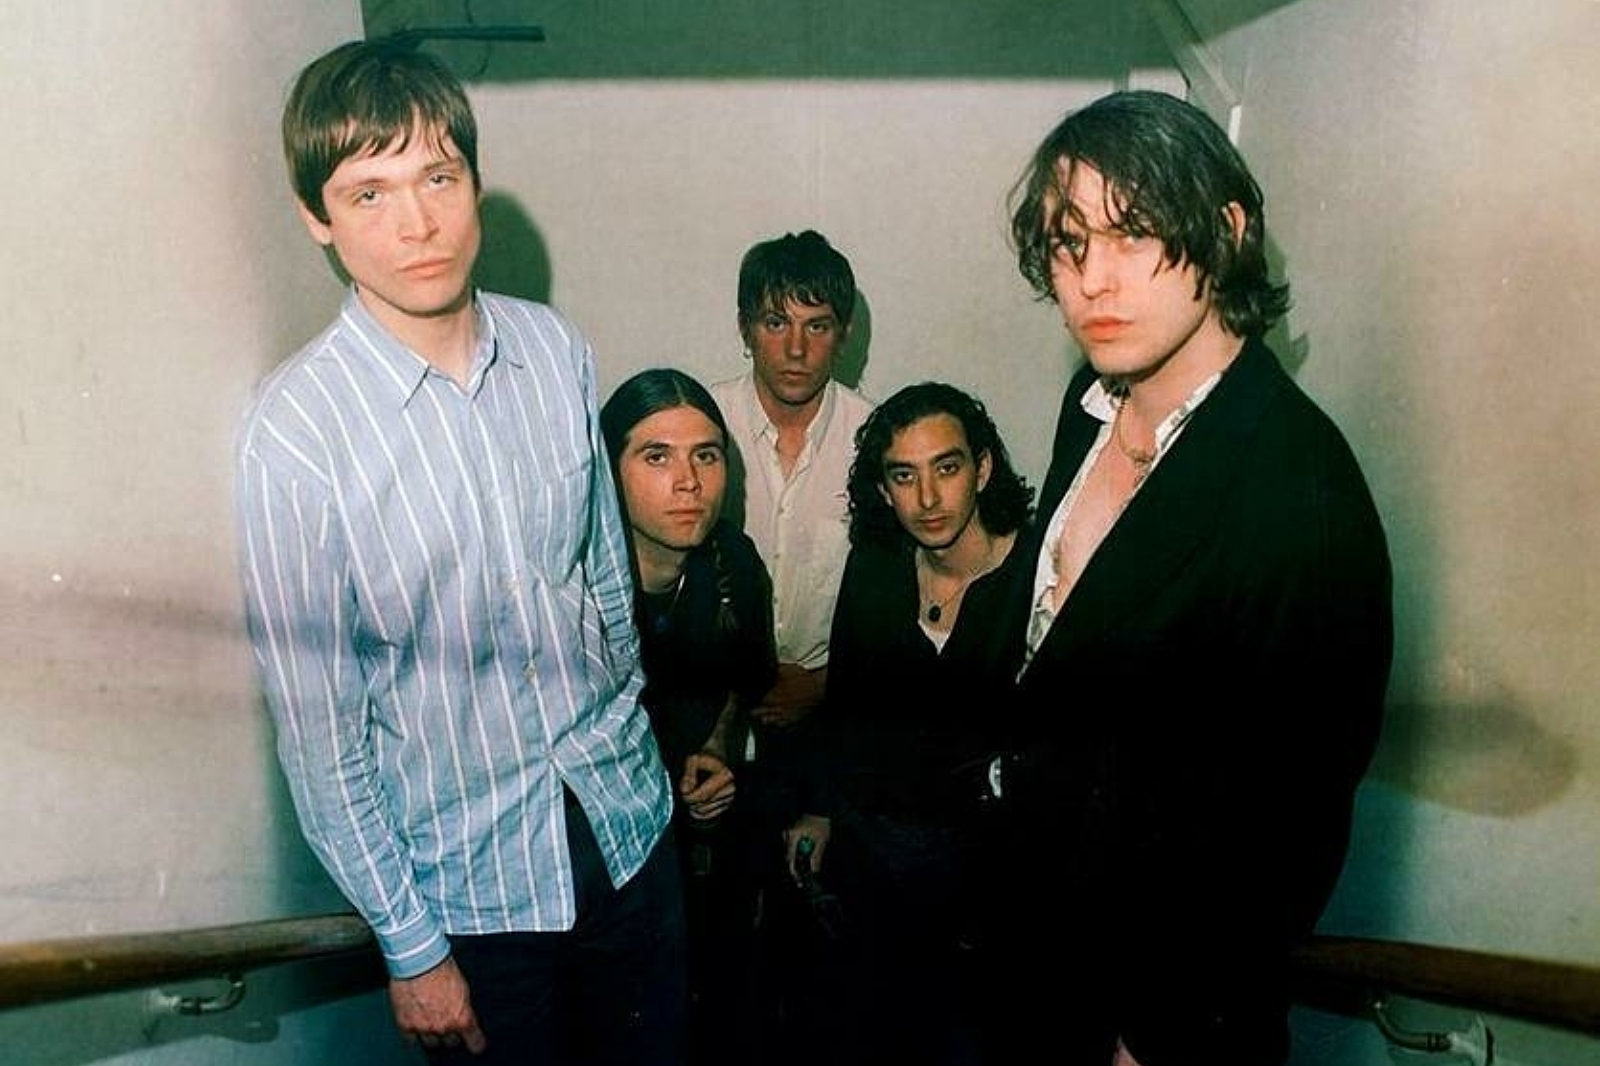 Iceage drop new track 'All The Junk On The Outskirts'